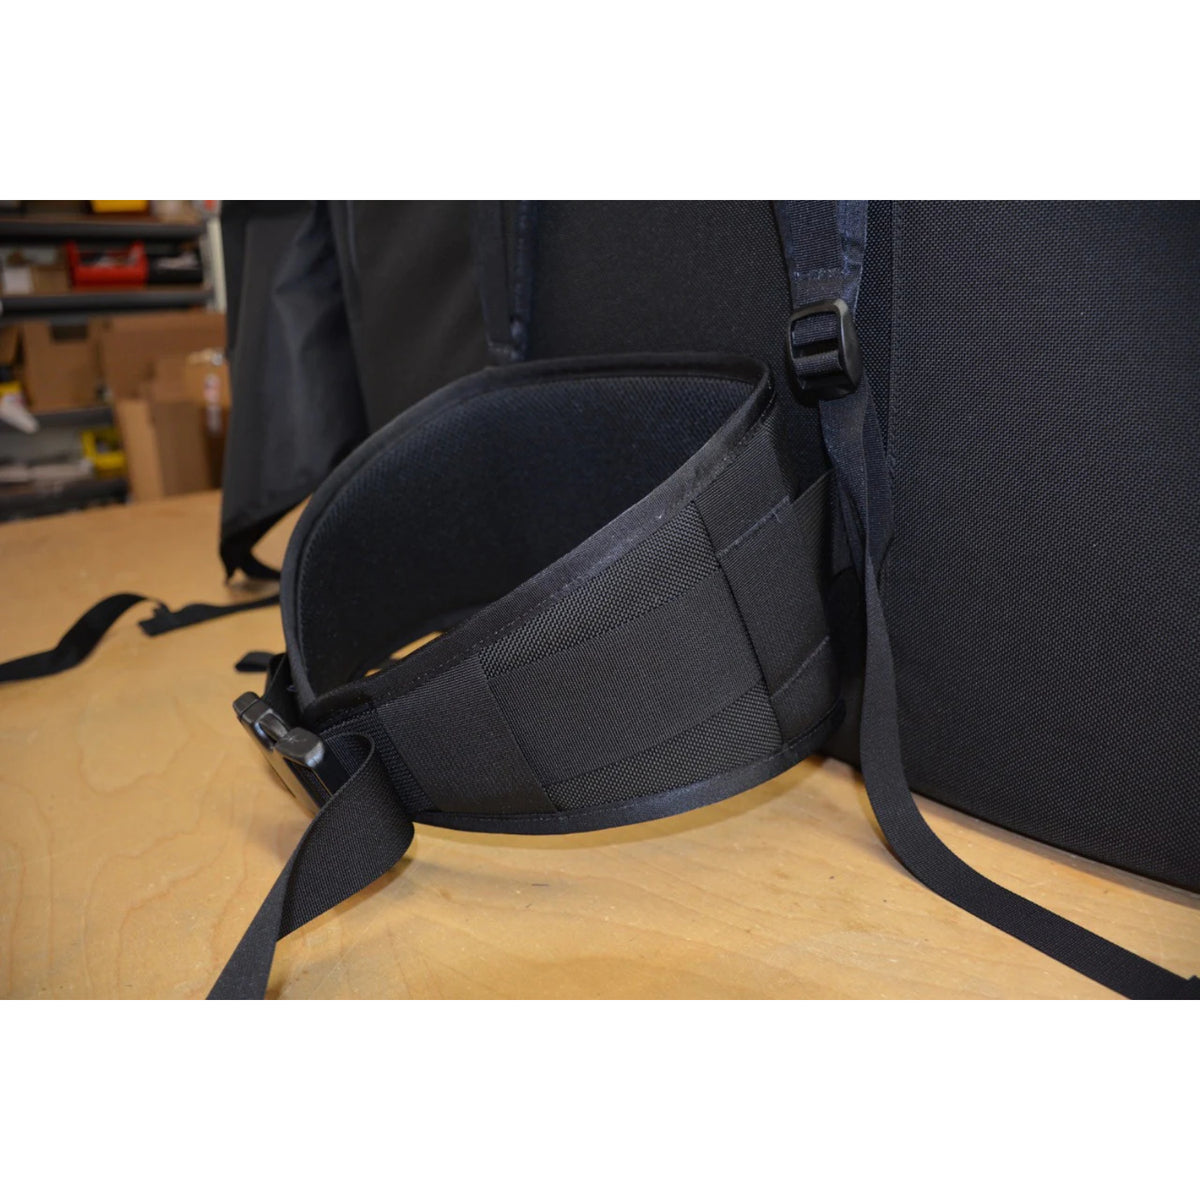 Organic Deluxe Muffin Protector hip belt in black